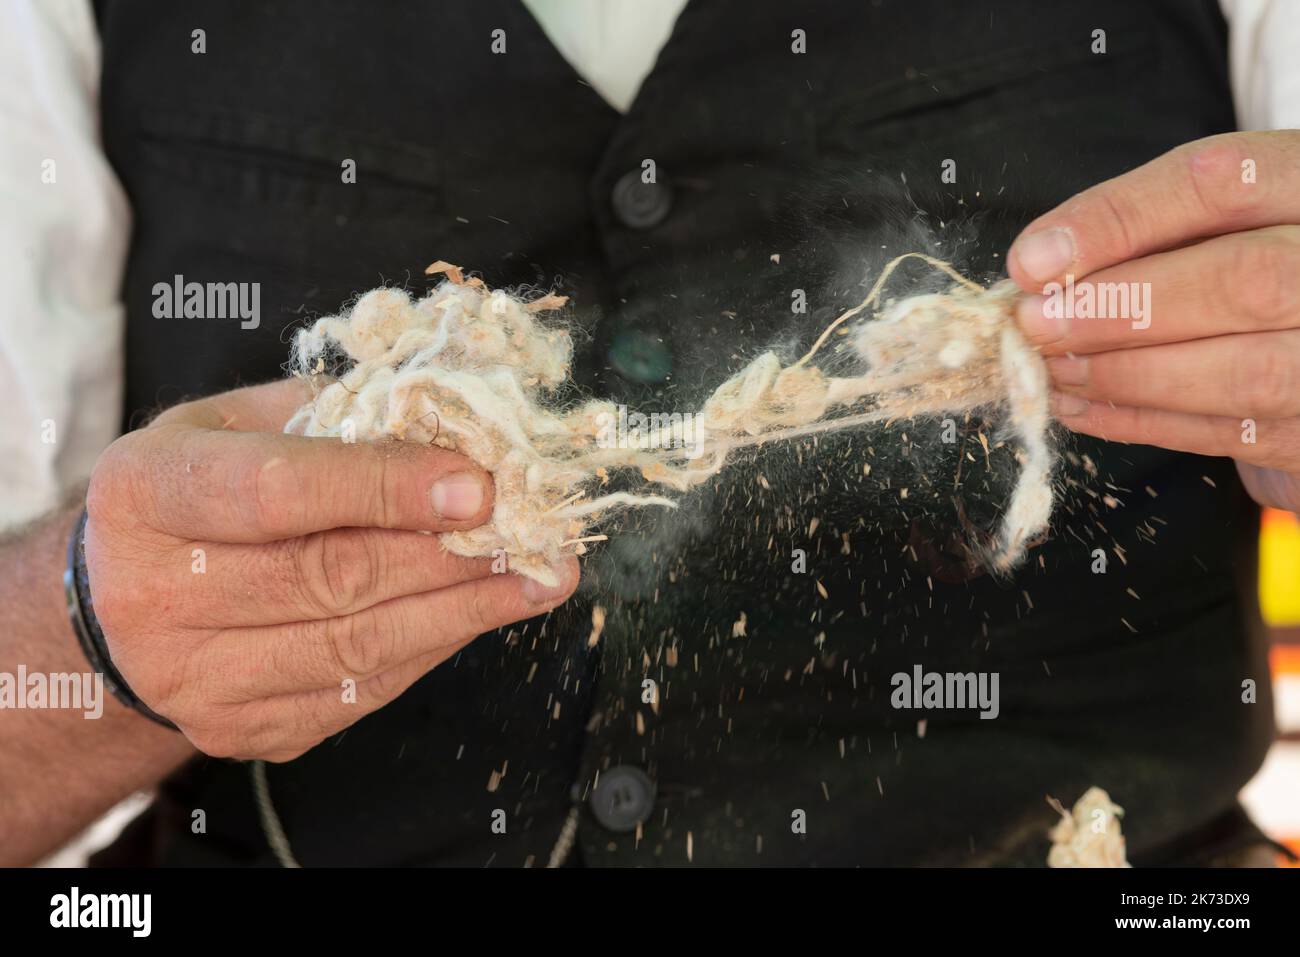 Italy, Lombardy, Historical Reenactment Farmer,  Man Hands Holding Unprocessed Raw Pashmina Wool Stock Photo